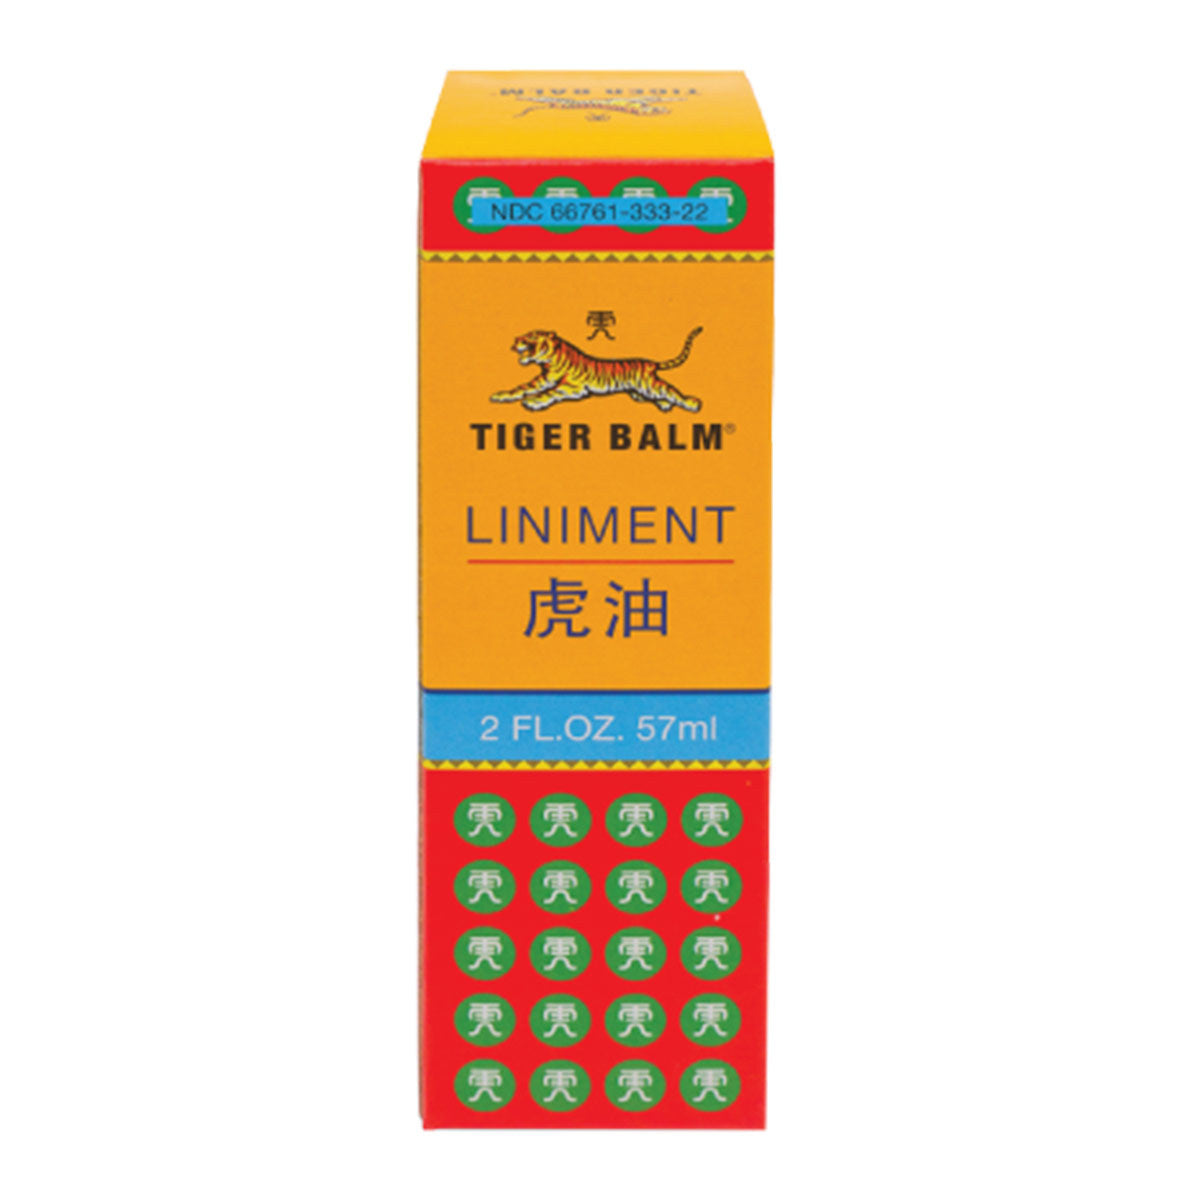 Primary image of Tiger Balm Linament